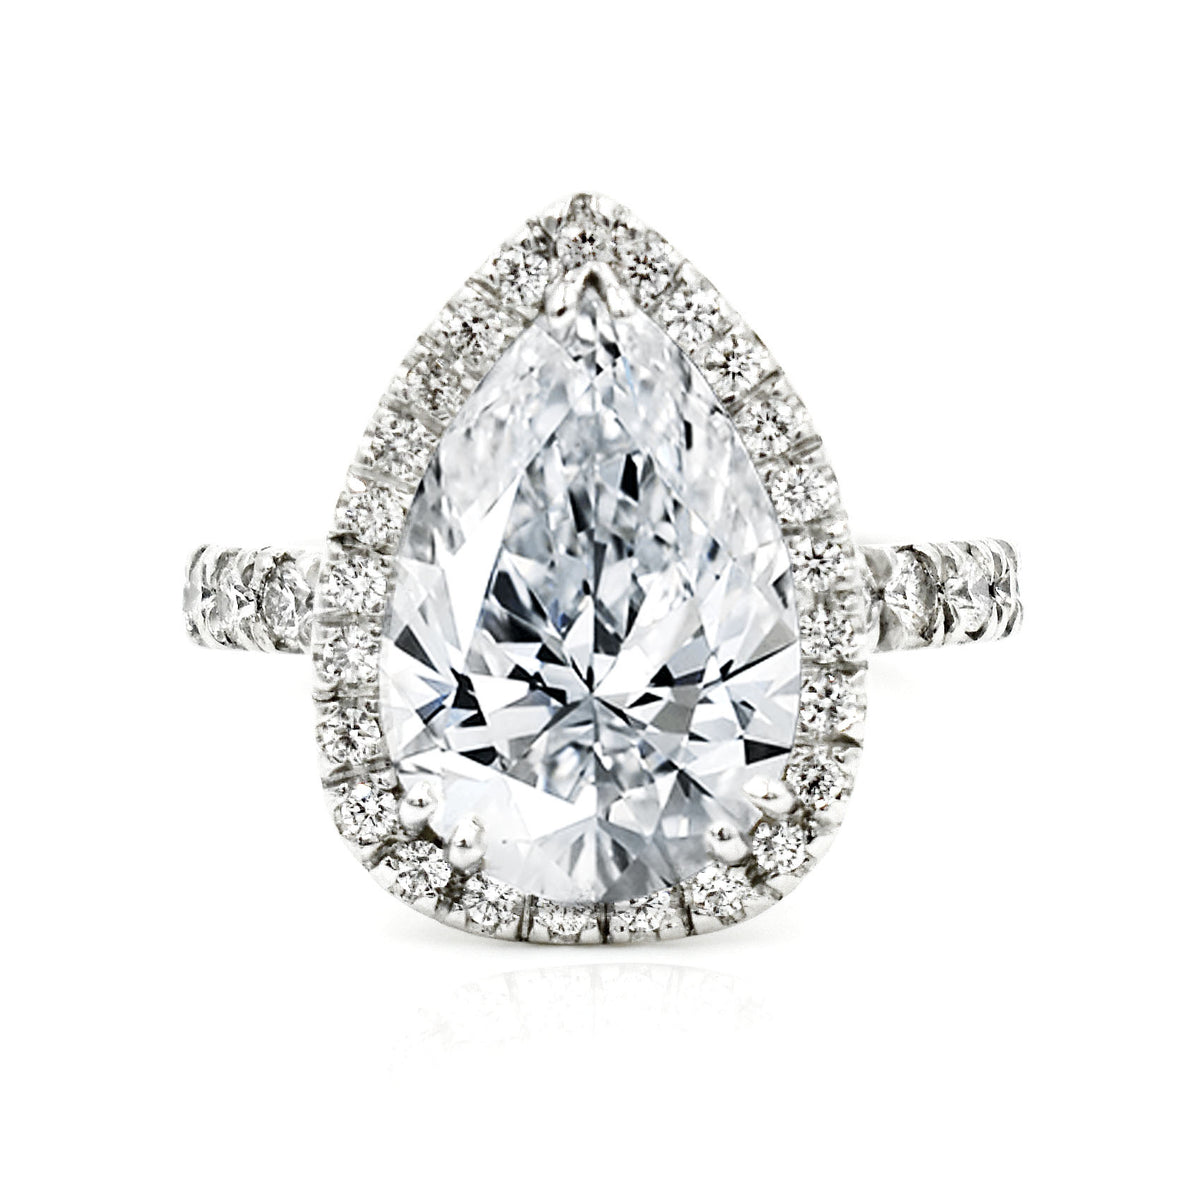 Platinum 4.07ct Pear Shaped Diamond Ring with Micro Pave Halo